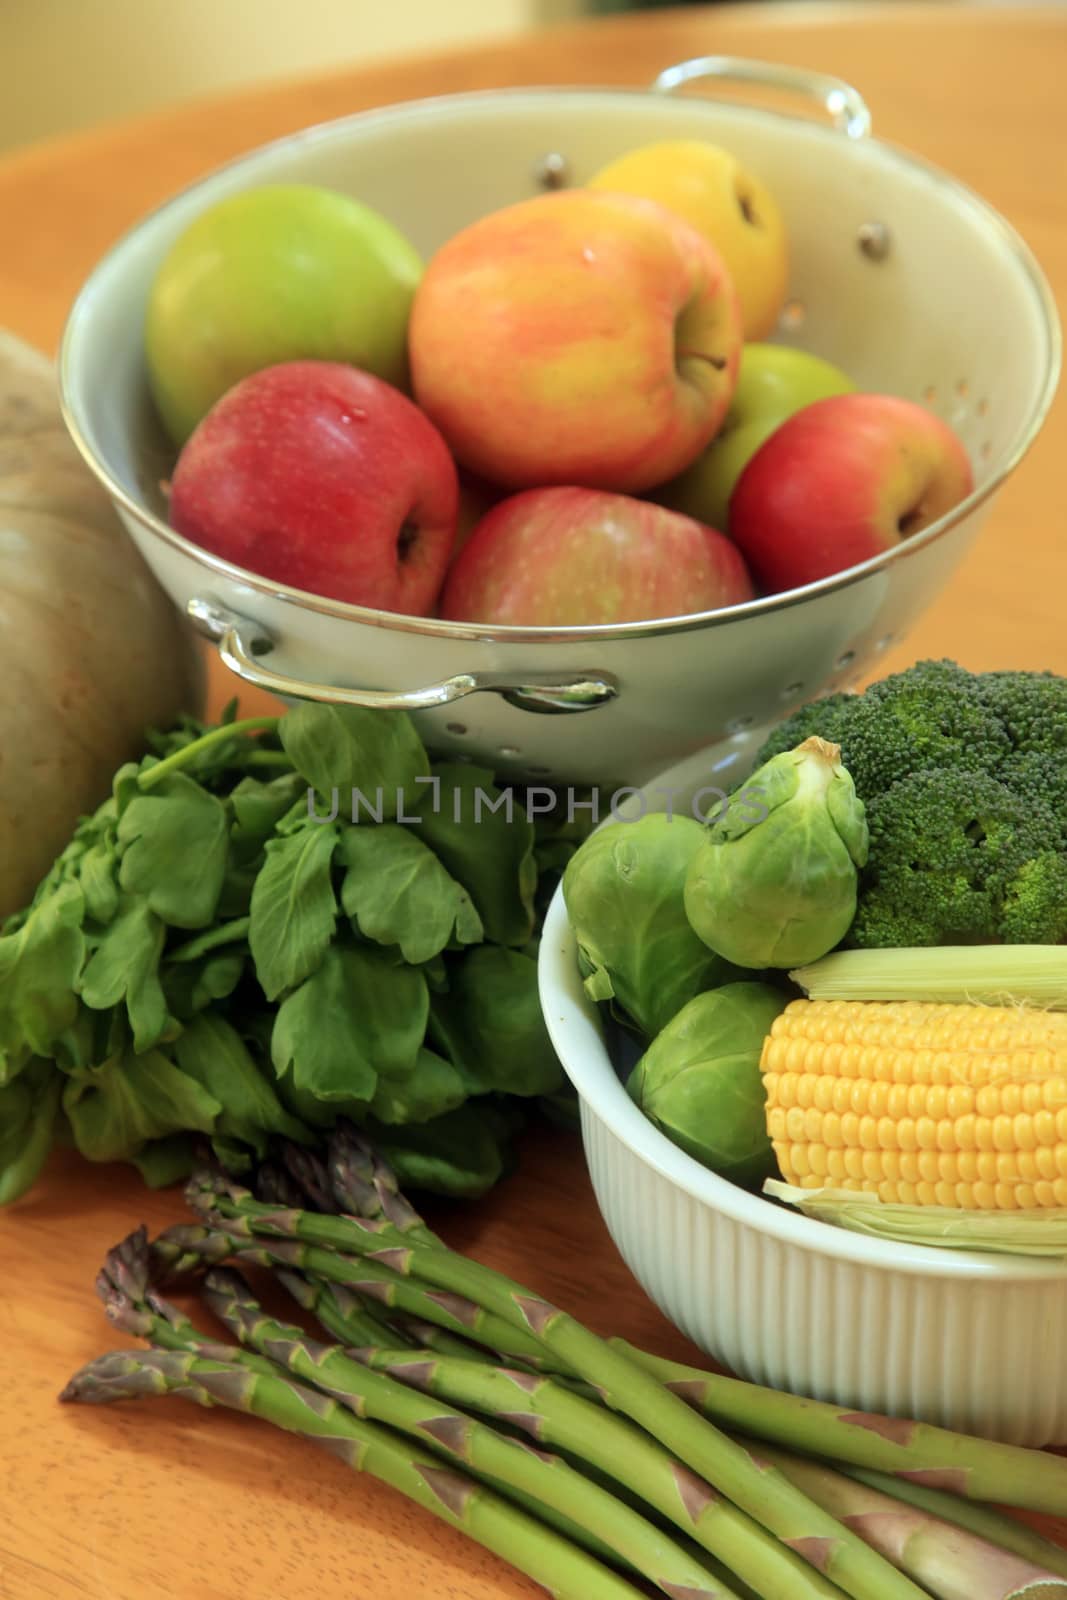 Large Variety of Fresh Vegetables for Cooking